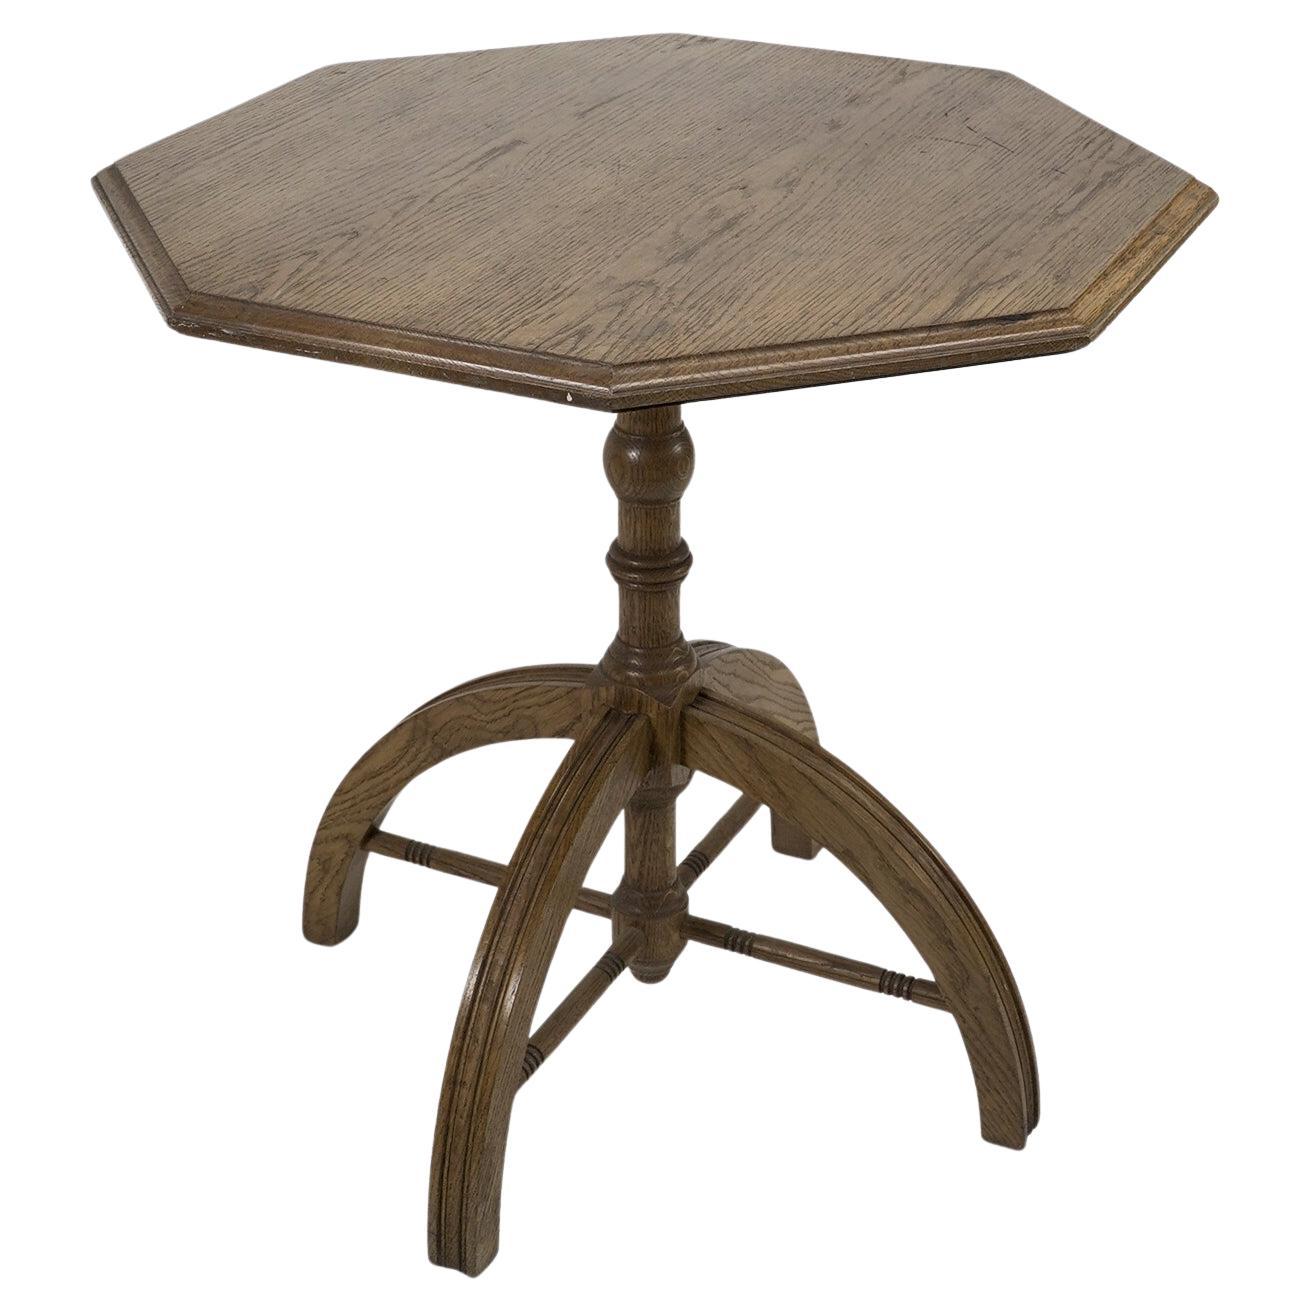 A W N Pugin. A modern craftsman made Gothic Revival oak octagonal centre table For Sale